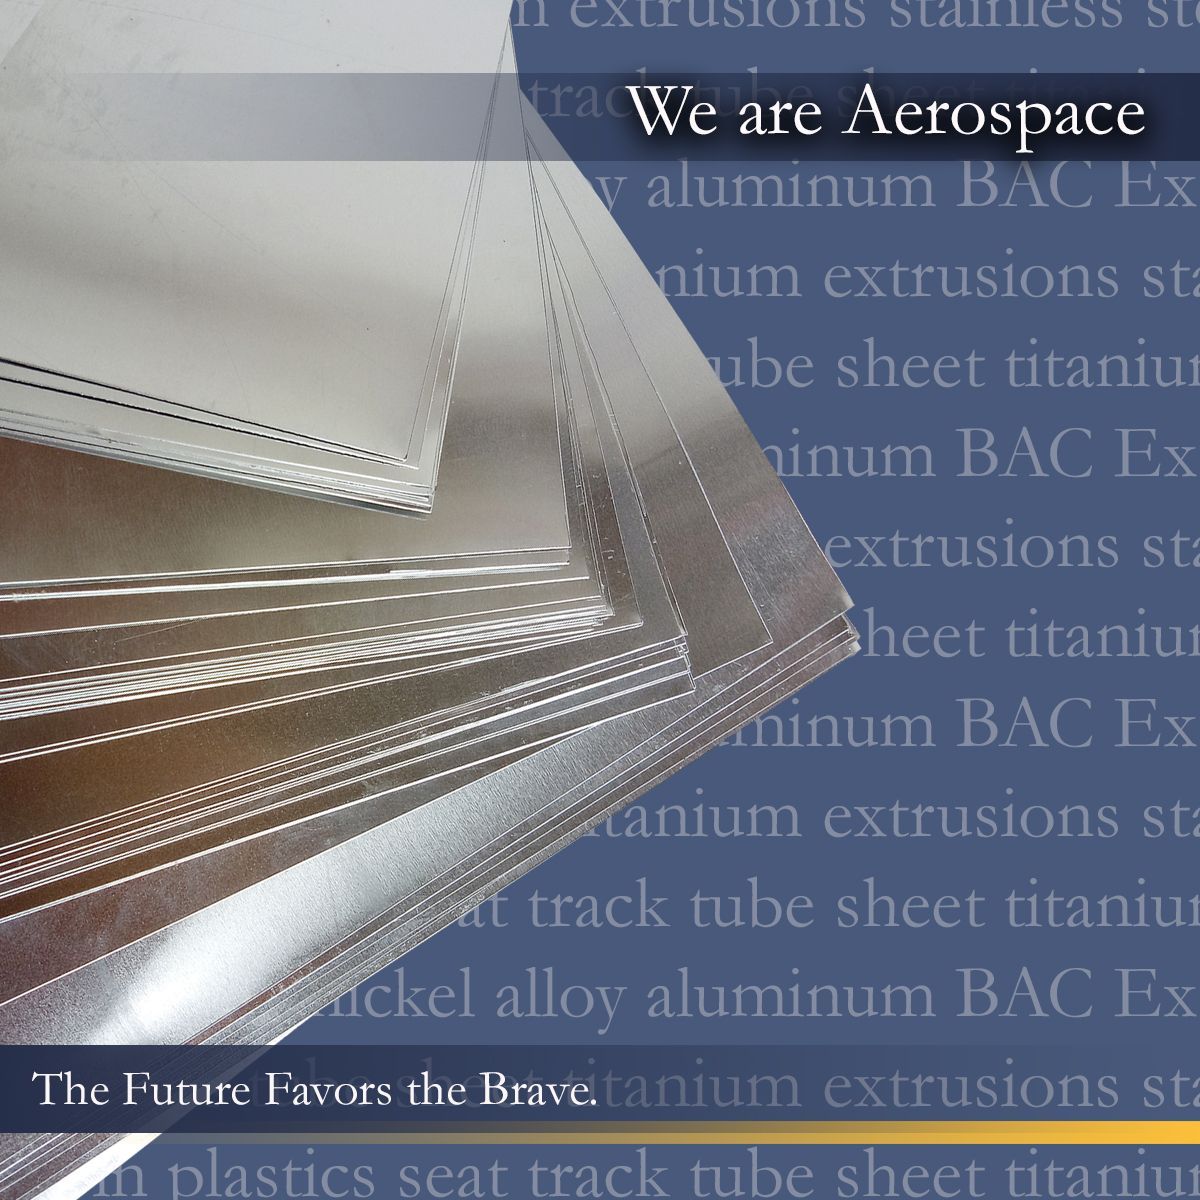 future metals 1. High-grade 6061-T6 Aluminum alloy sheets by Future Metals, perfect for aerospace.
2. Reflective A7075 aluminum sheets - Aircraft grade metal in Future Metals' warehouse.
3. Stack of Aerospace-grade reflective A2014-T6 Aluminum alloy by Future Metals supply chain.
4. Future Metals' compliant A2024 aluminum sheets - doandent solution to aerospace metallurgy needs.
5. Watermark overlay on Reflective 6061-T651 Aerospace Alloy, offered through Future Metals.
6. Specialty aviation alloys like this stacked reflective 7050-T7451 from reliable supplier, Future Metals.
7. Prominent supplier, ‘Future Metal’ provides aircraft grade reflective 5052-H32 Aluminum alloy sheets for aerospace industries
8: Compliance ensured with Future Metal's aircraft-grade AI-2024 sheet stacks for aviation projects